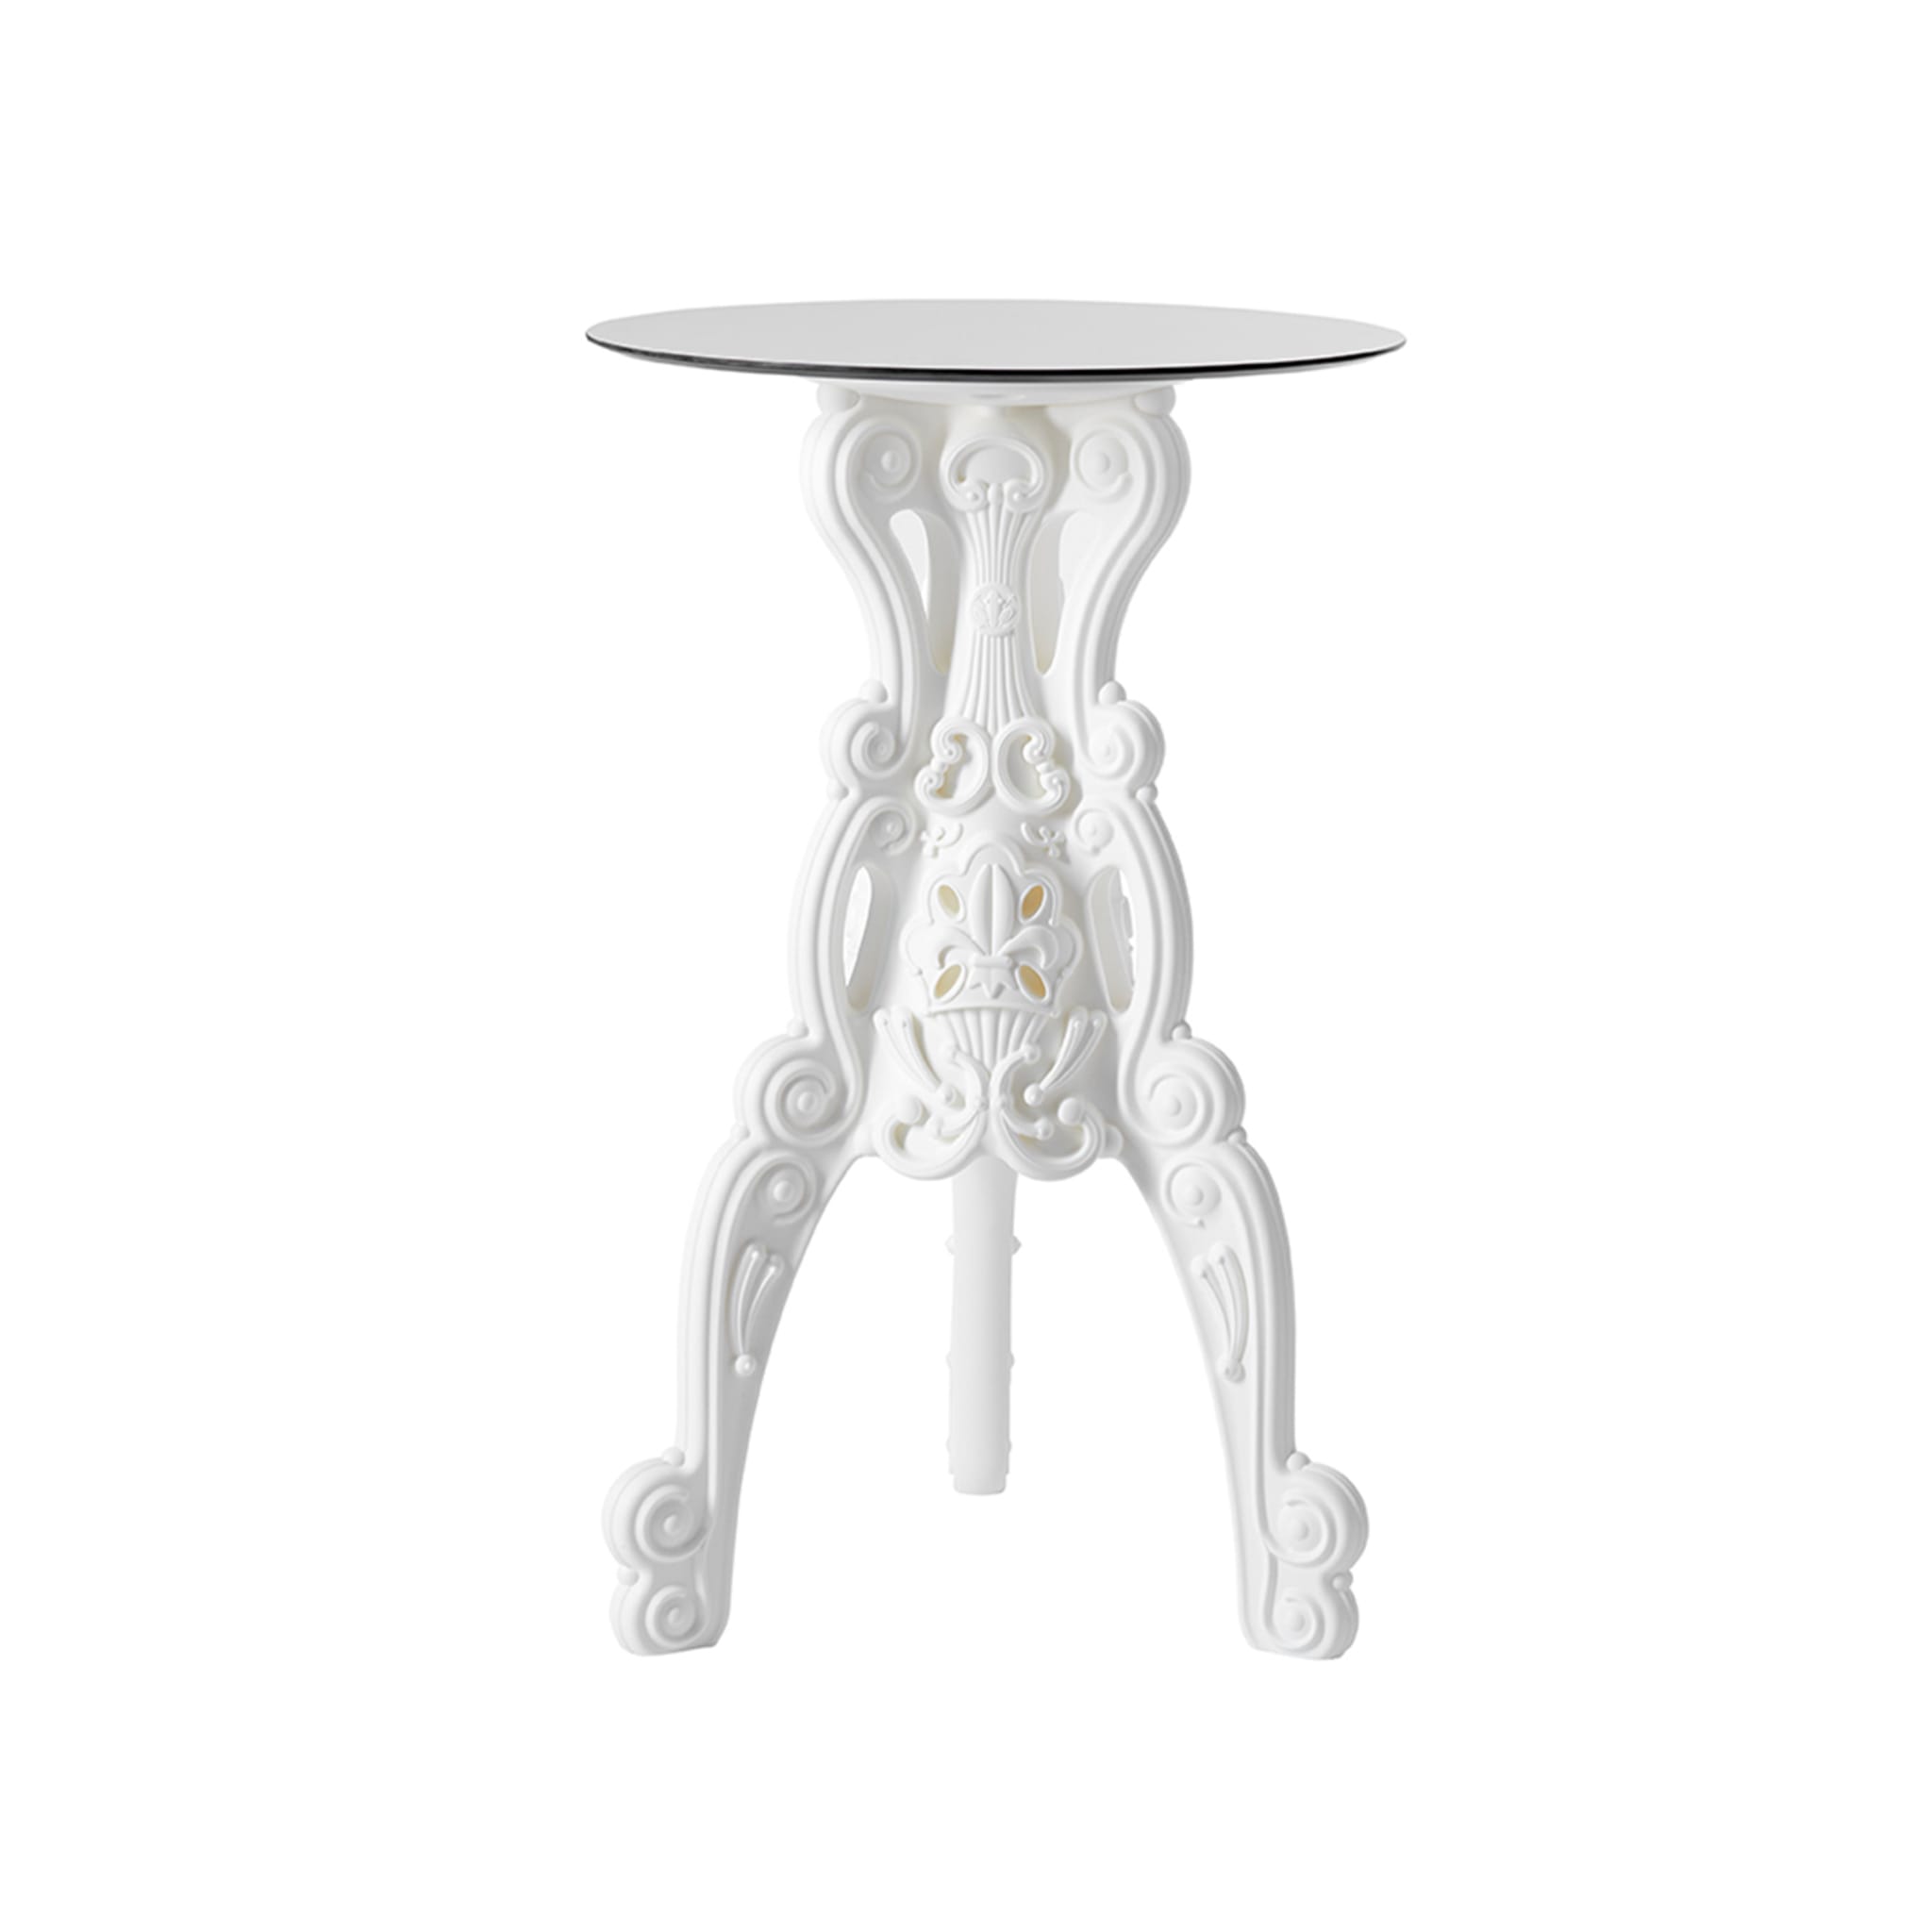 Master of Love White Bistro Table with Round Top - Alternative view 2